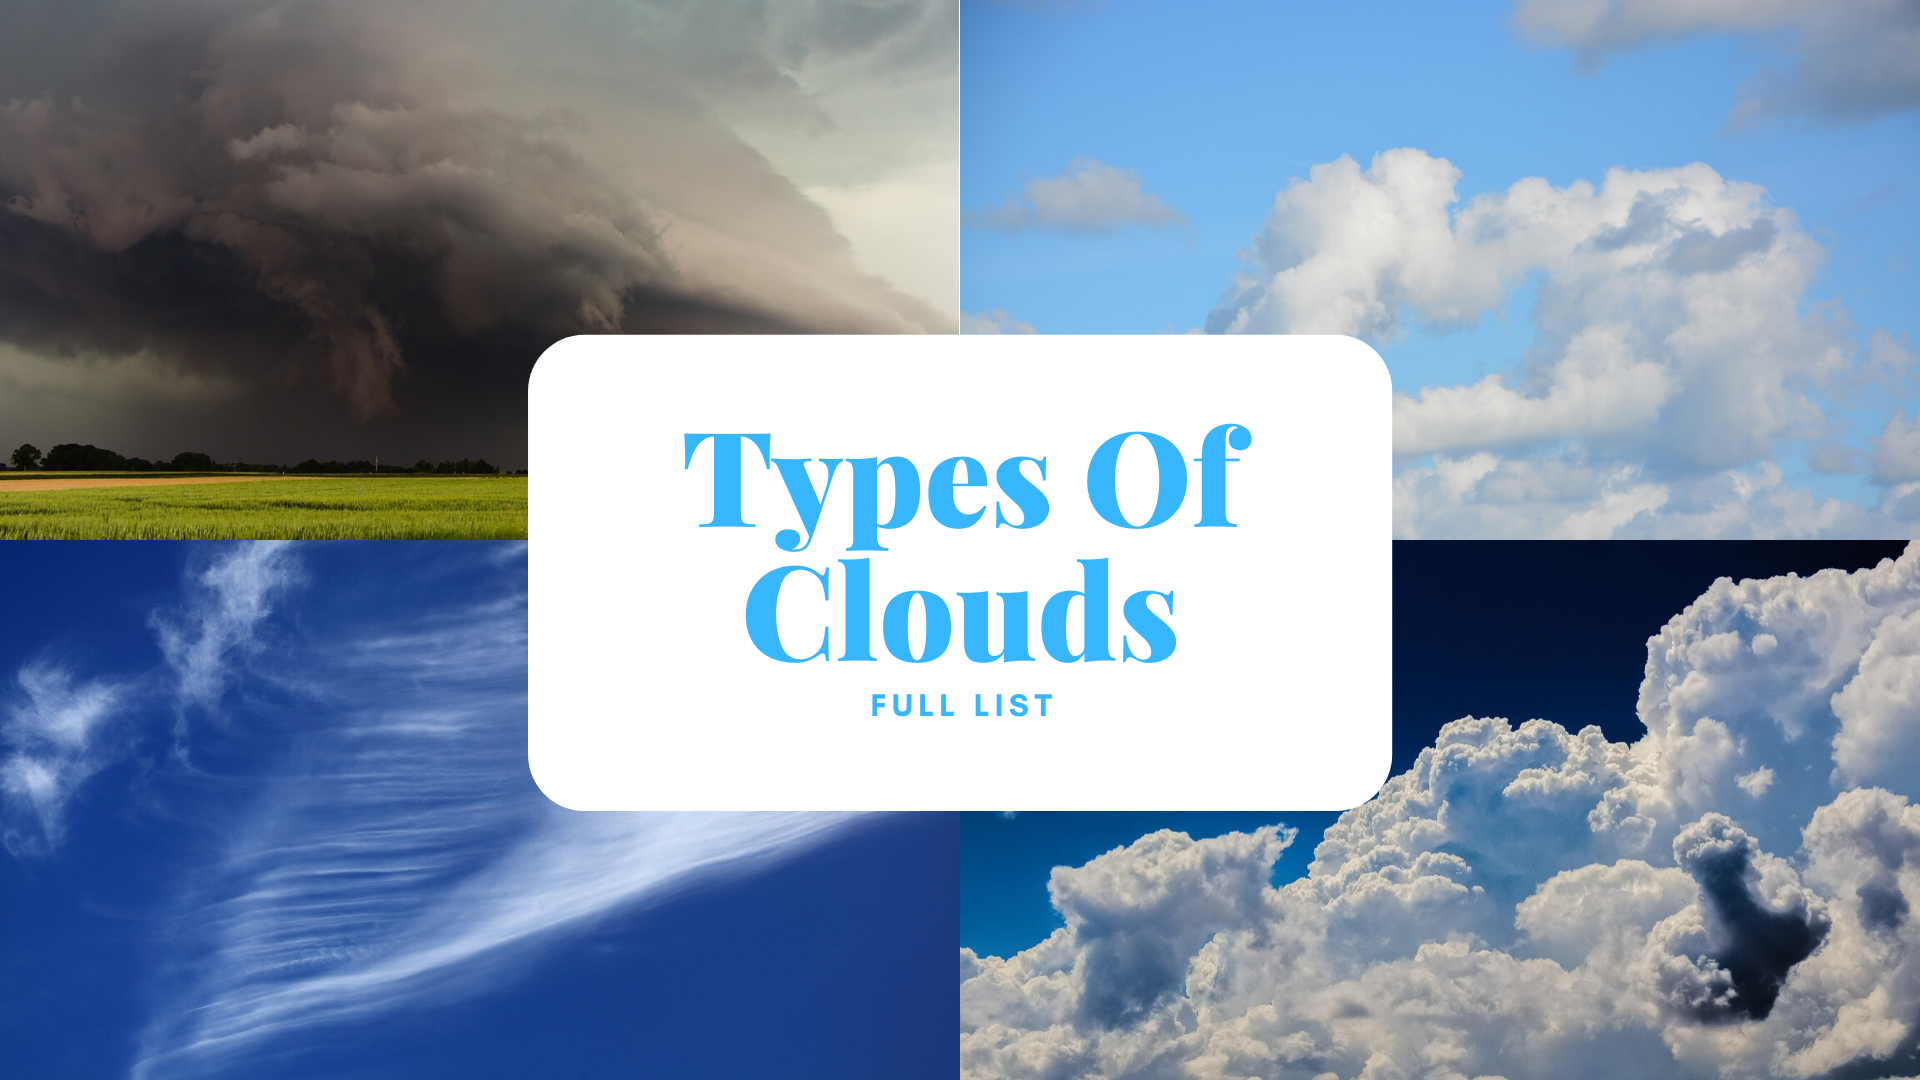 3 Types Of Clouds